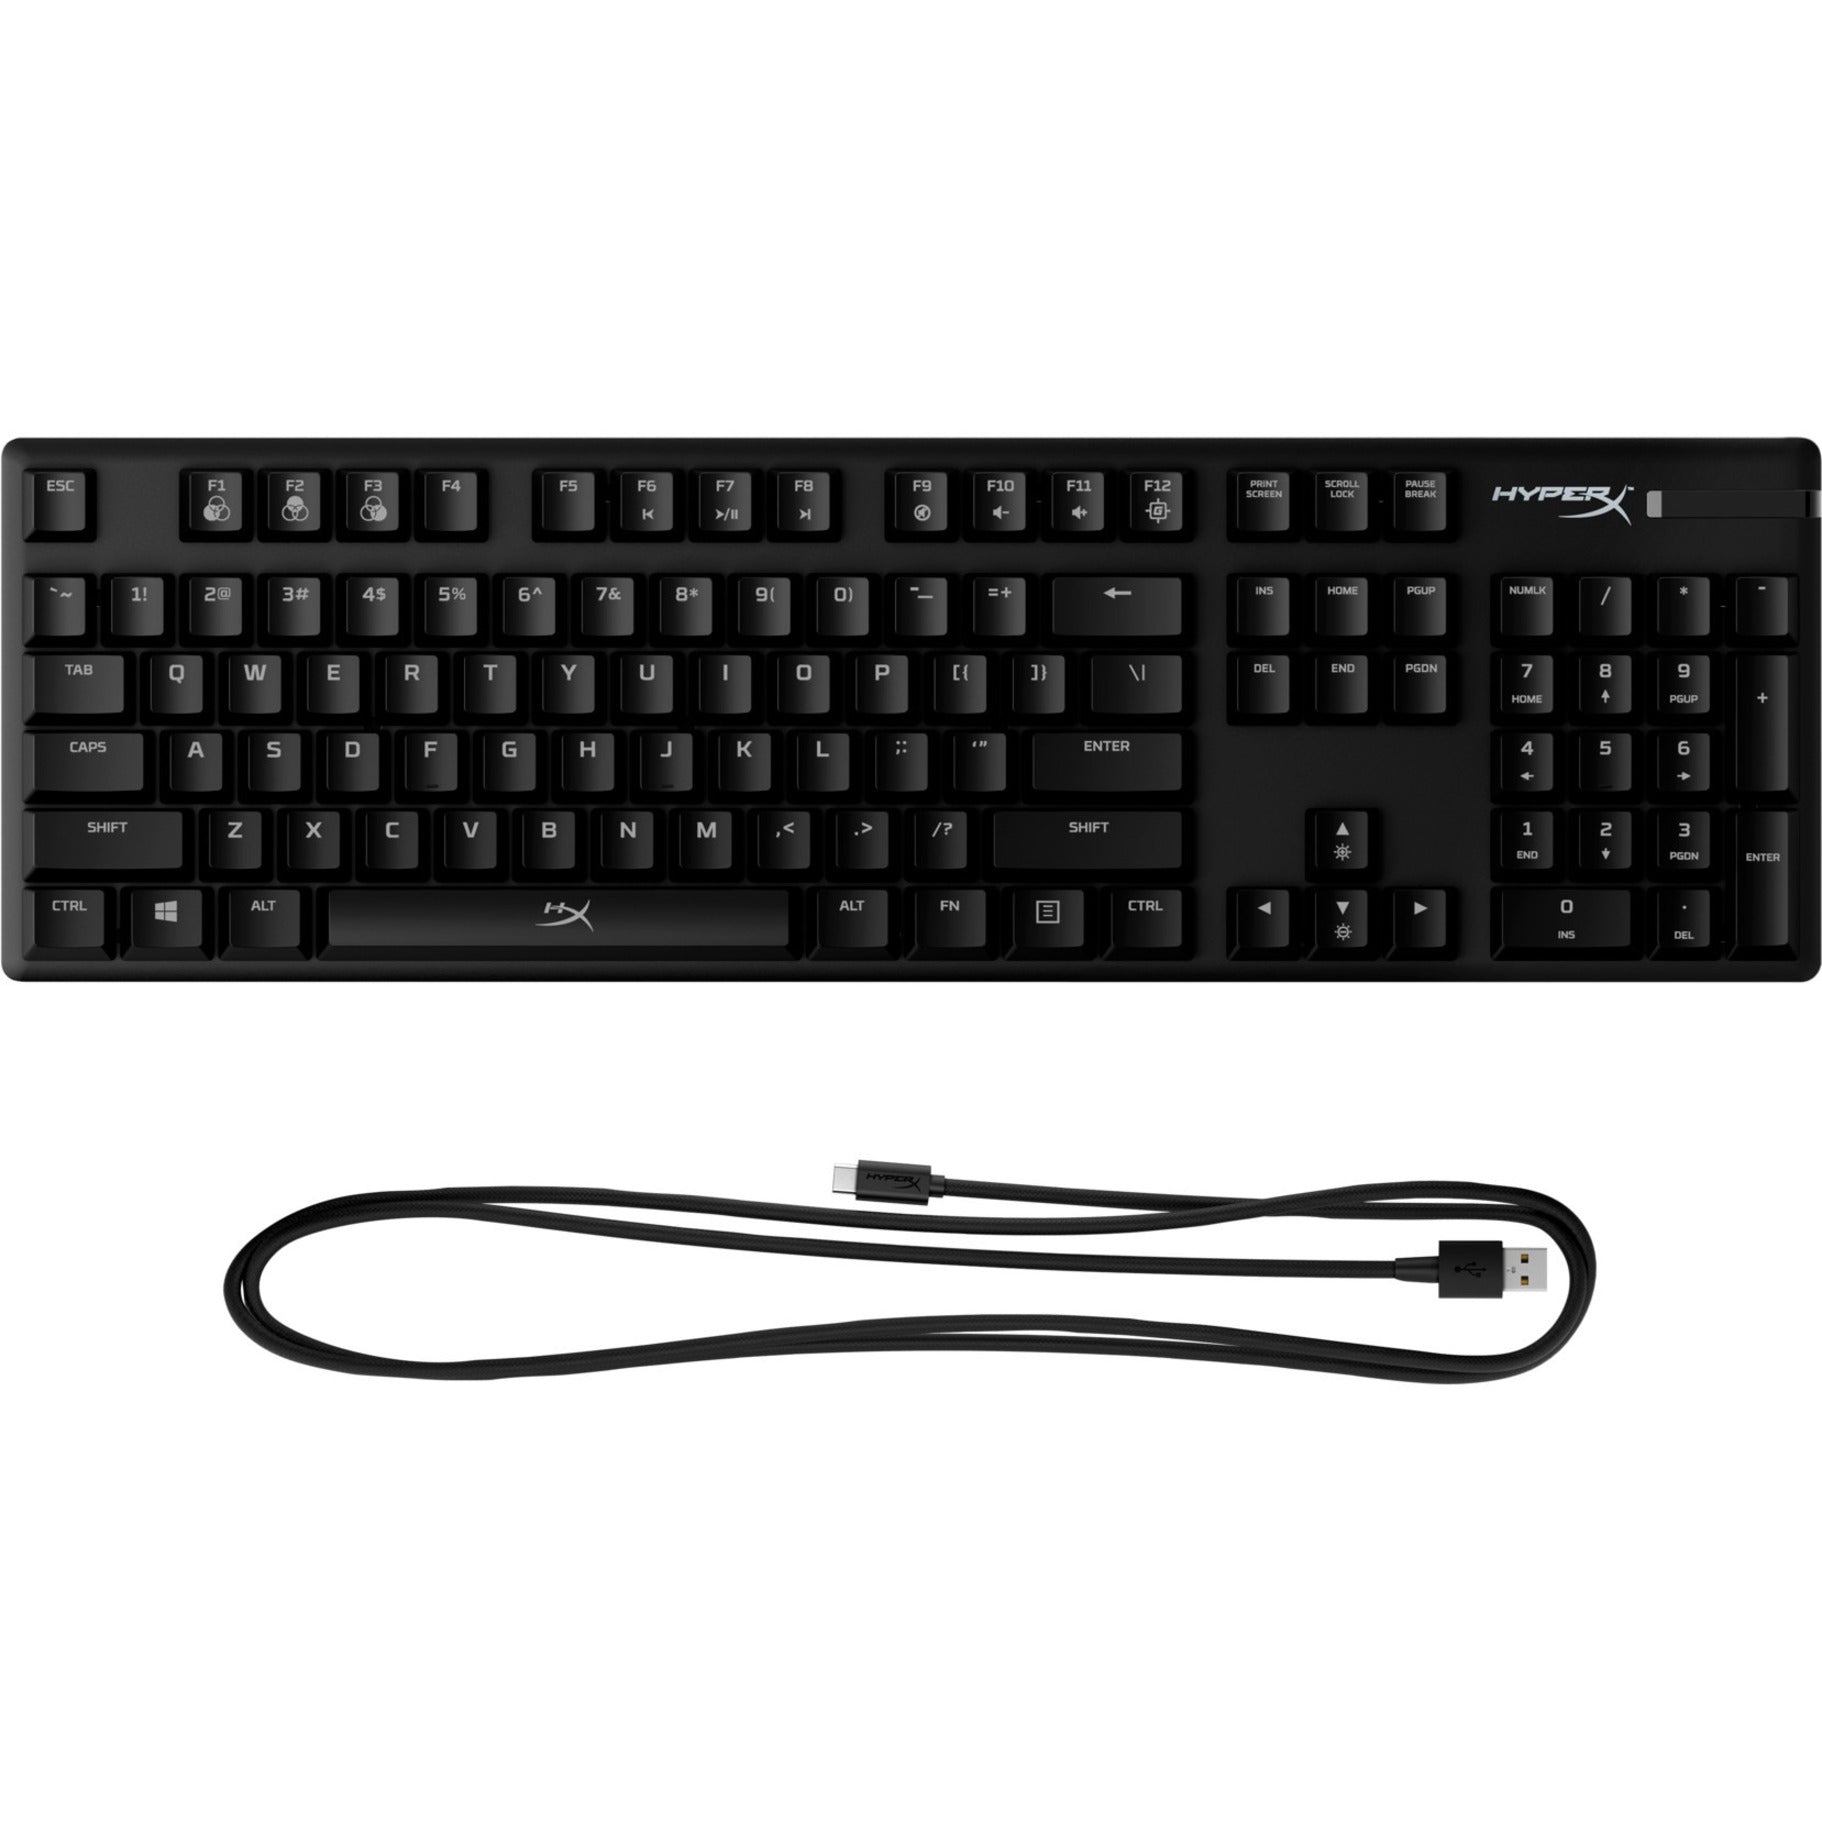 HyperX Alloy Origins Mechanical Gaming Keyboard - HX Aqua (US Layout), Backlit RGB LED, Compact Full-size, Detachable Cable, Built-in Memory